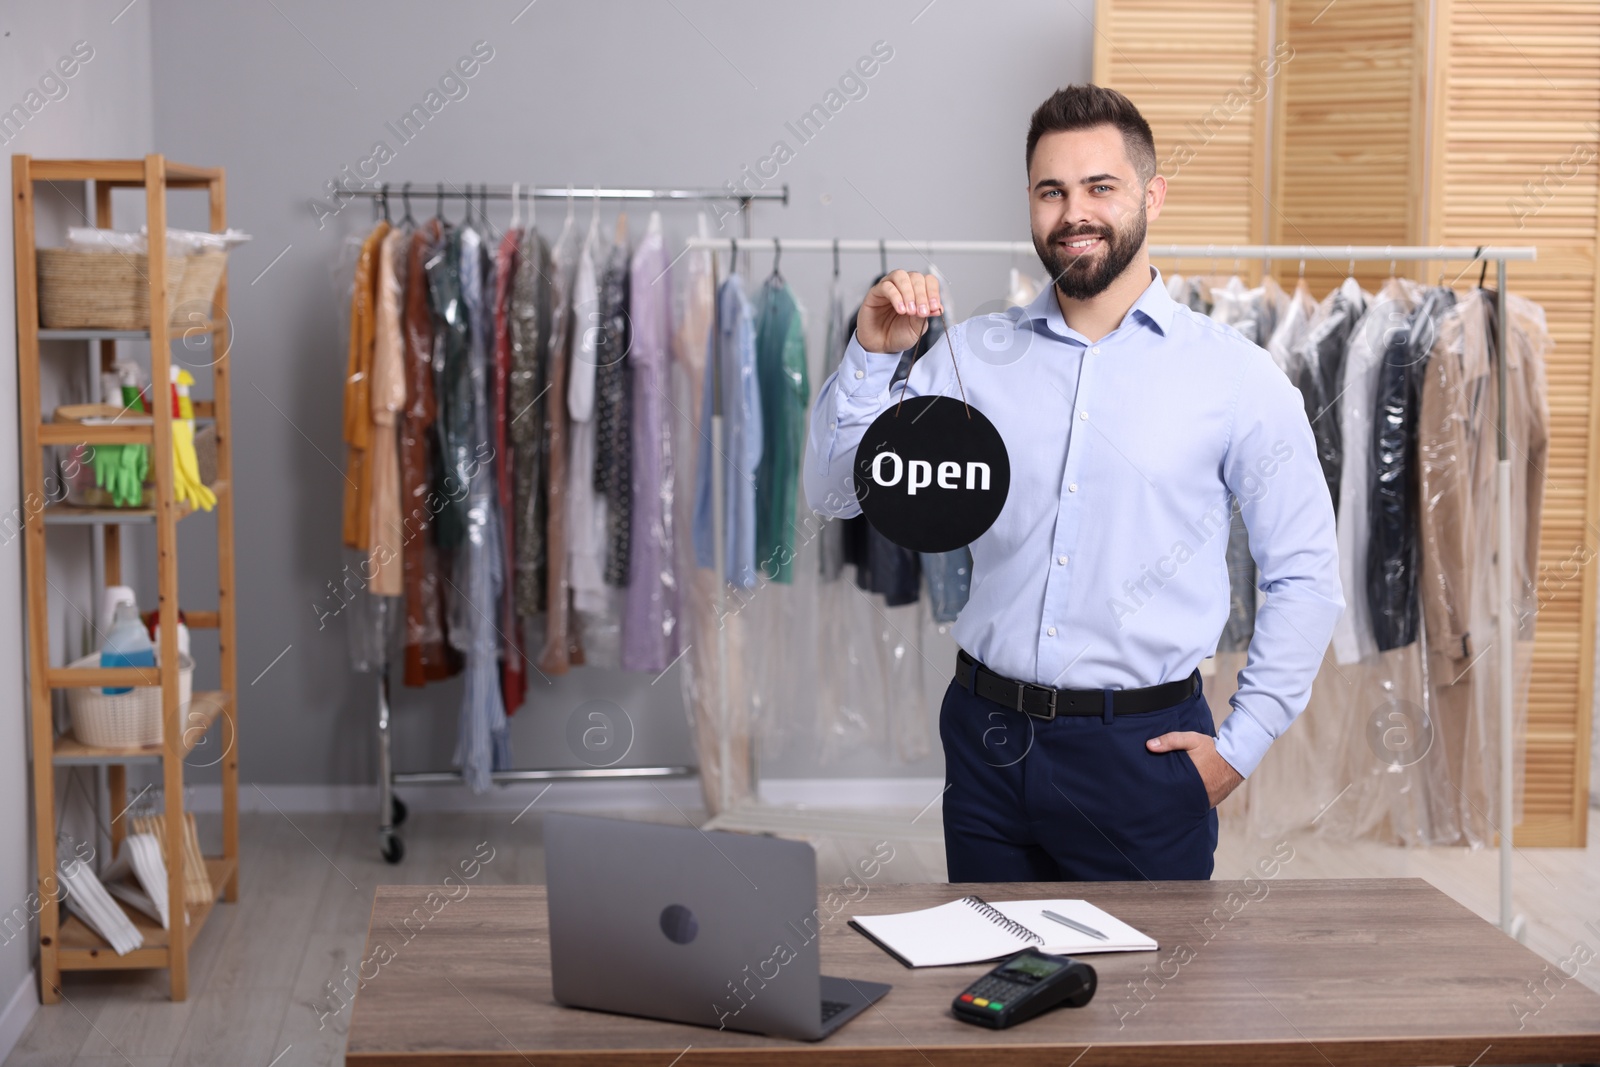 Photo of Dry-cleaning service. Happy worker holding Open sign at workplace indoors, space for text